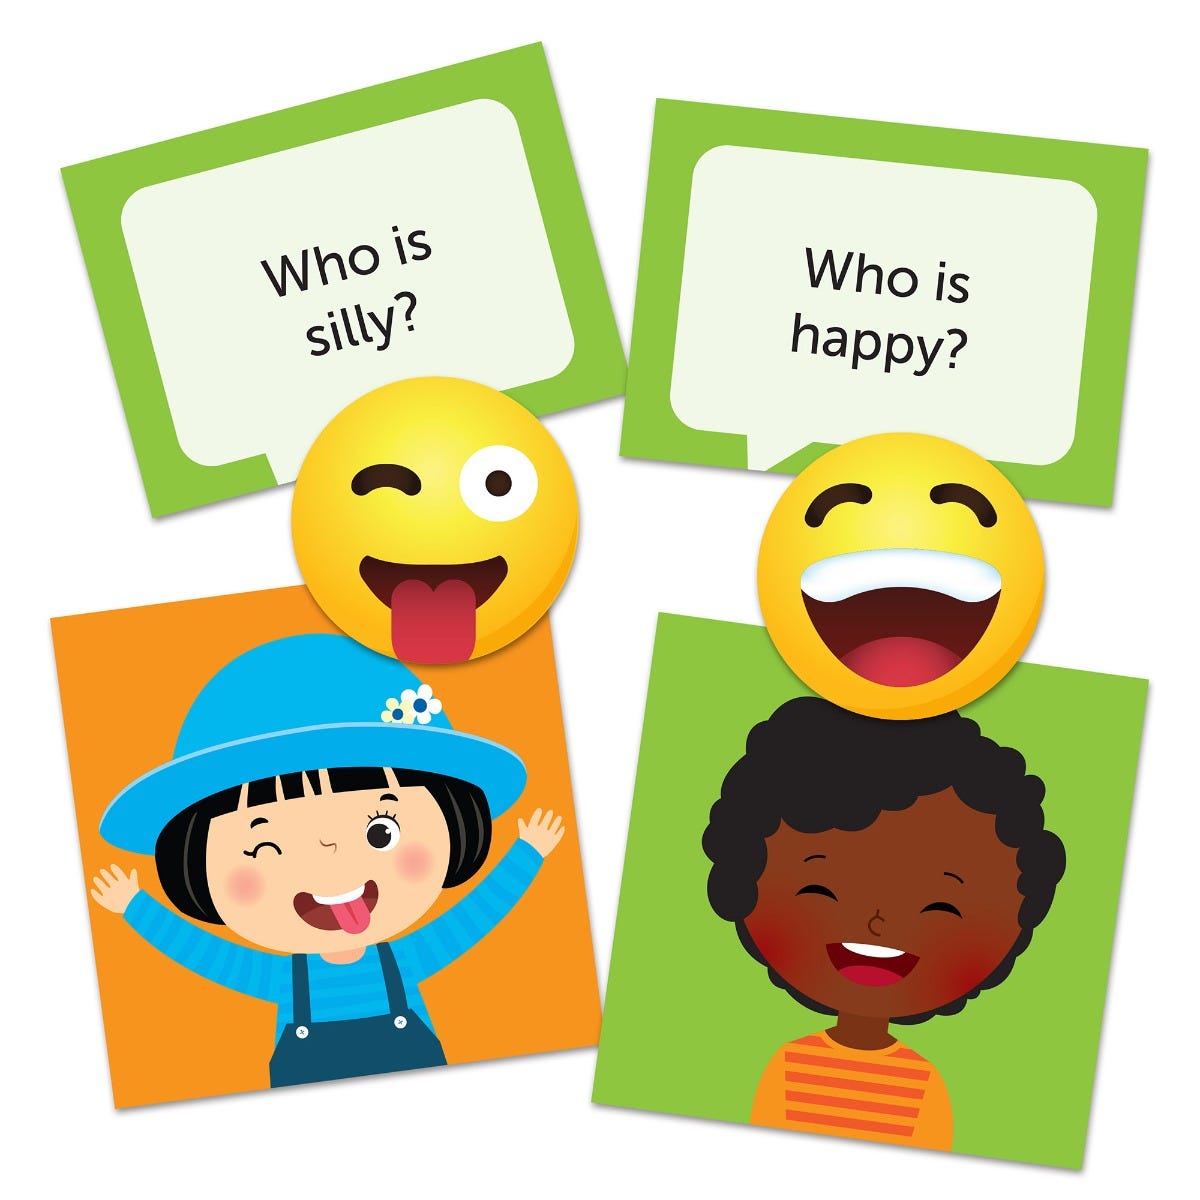 Who's Feeling What, There are so many fun ways to help children with identifying emotions and learning about themselves and others with Who’s Feeling What? Inspired by video calling, Children build empathy and SEL skills as they decode the video callers' facial expressions in this communication game. Set up the board with 12 child callers, draw a chat card containing an SEL prompt, then mark the callers with matching emotions using fun emoji tokens. With caller cards, emotion prompt cards, and emoji tokens,